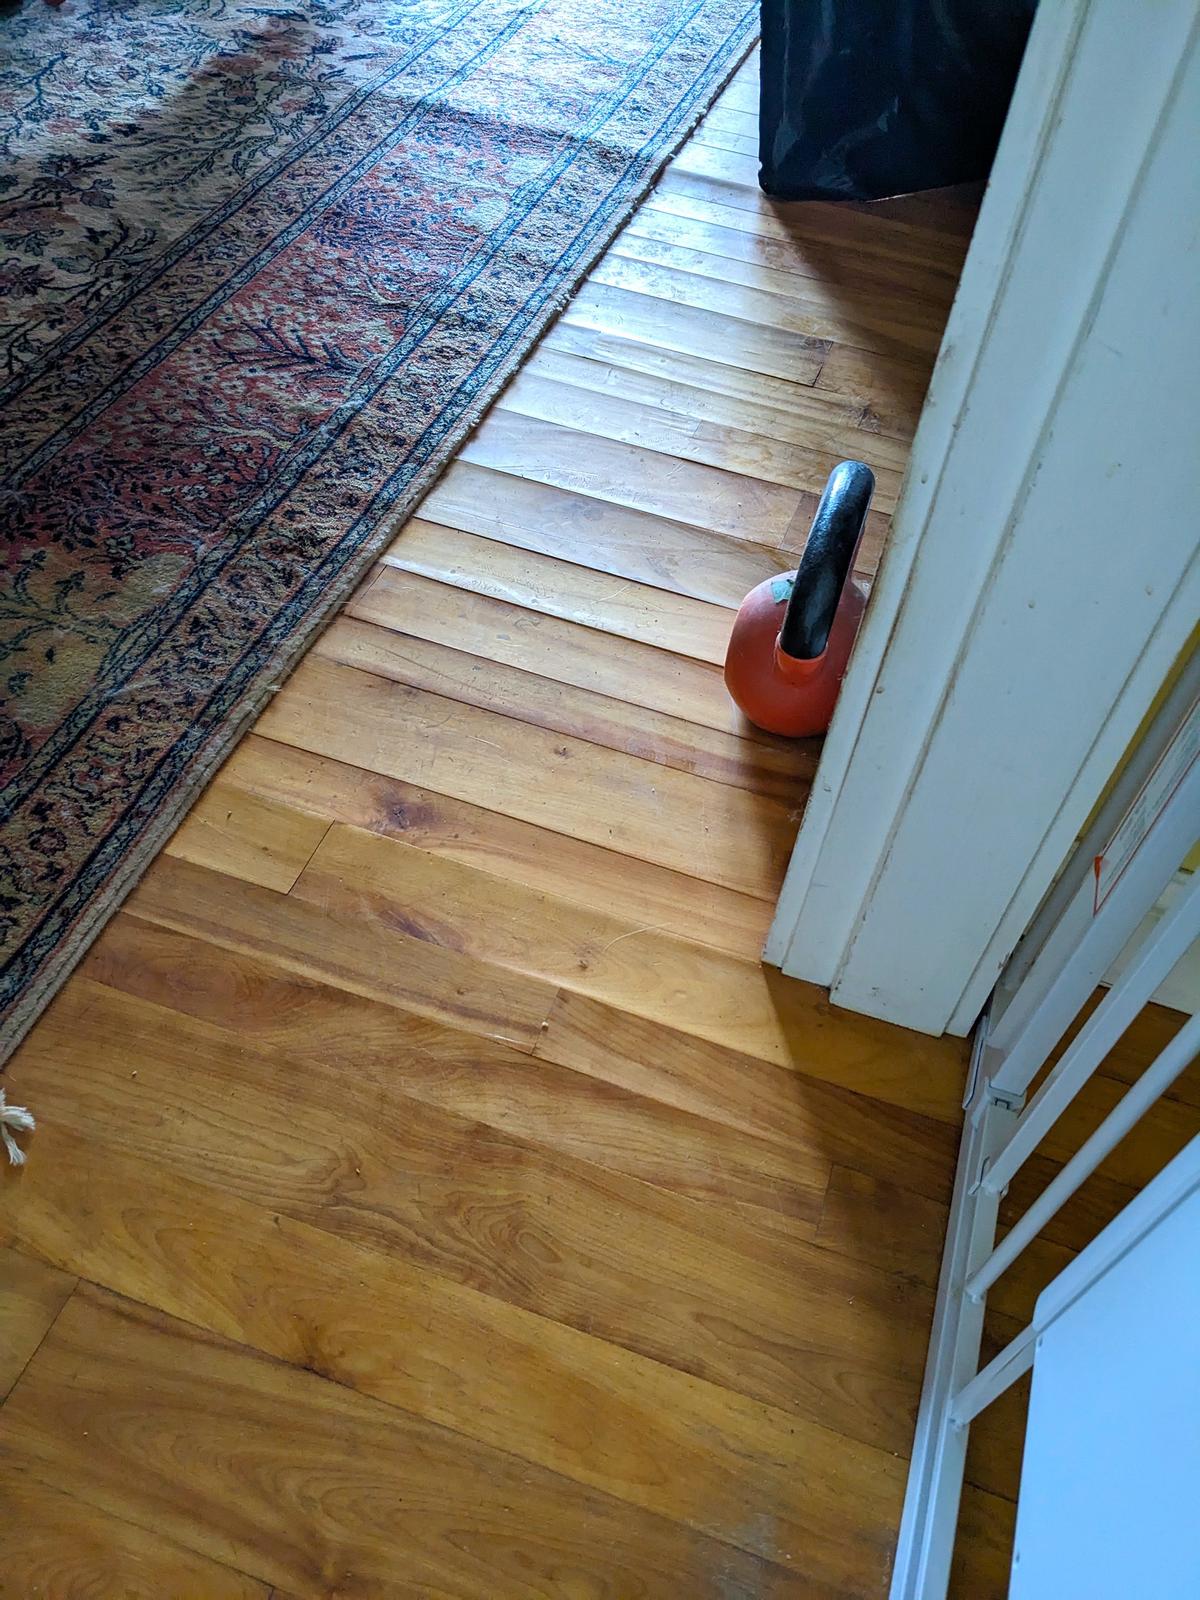 Water dripping silently through the night caused thousands of dollars of damage, including warping this hardwood floor. (Tim Carter/TNS)